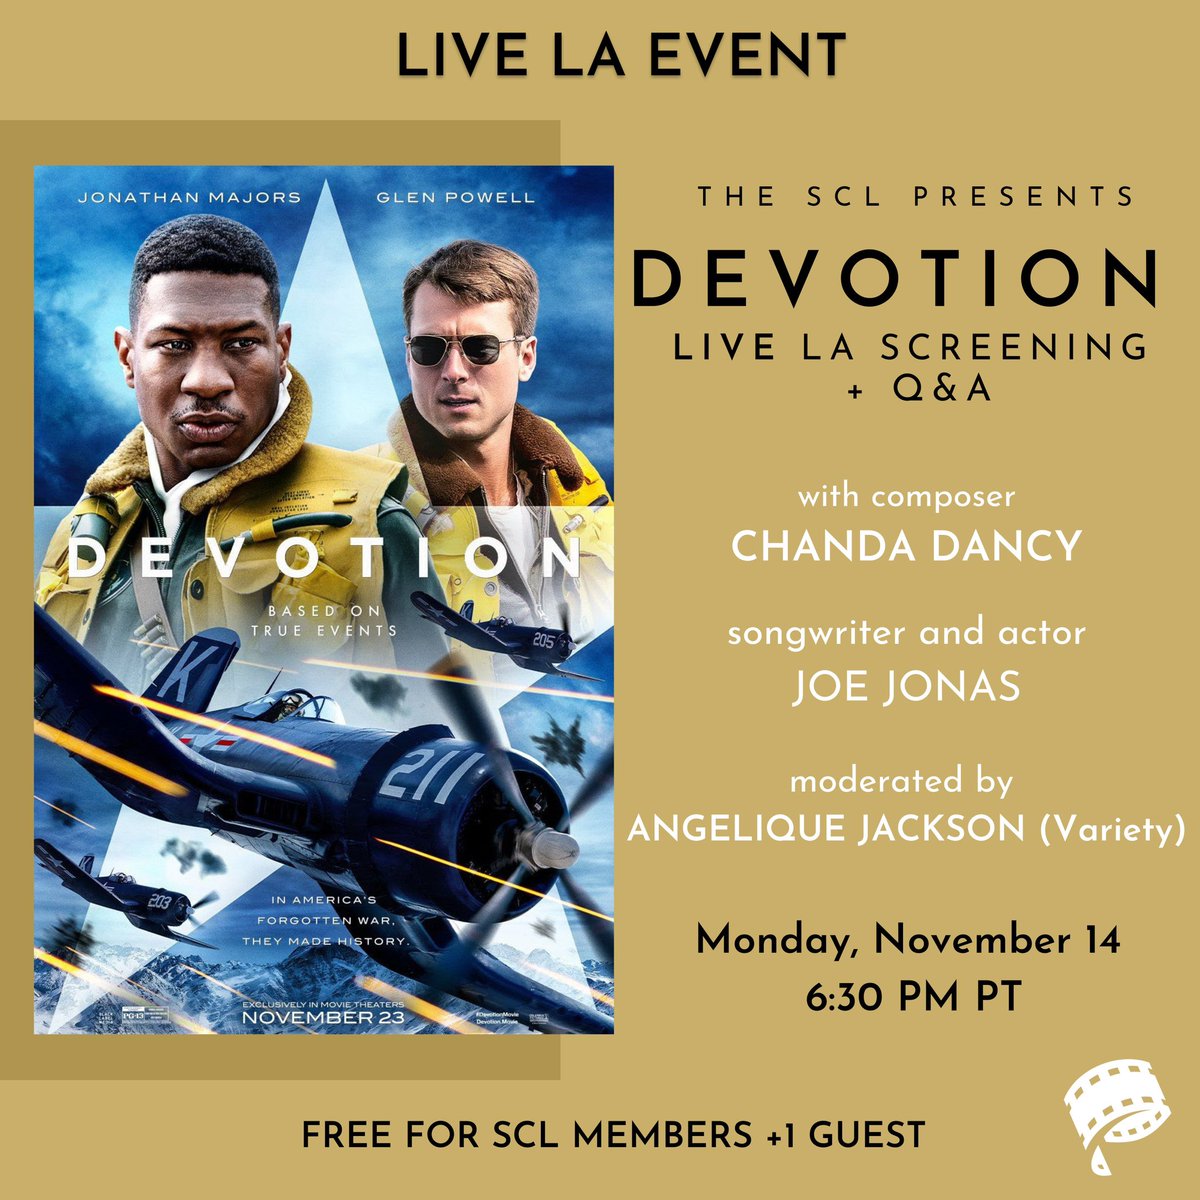 We are so thrilled to present a live screening of DEVOTION followed by a Q&A with composer CHANDA DANCY and songwriter/actor JOE JONAS, moderated by ANGELIQUE JACKSON (Variety) #devotion #screening #composer #chandadancy #songwriter #joejonas #score #music #thescl